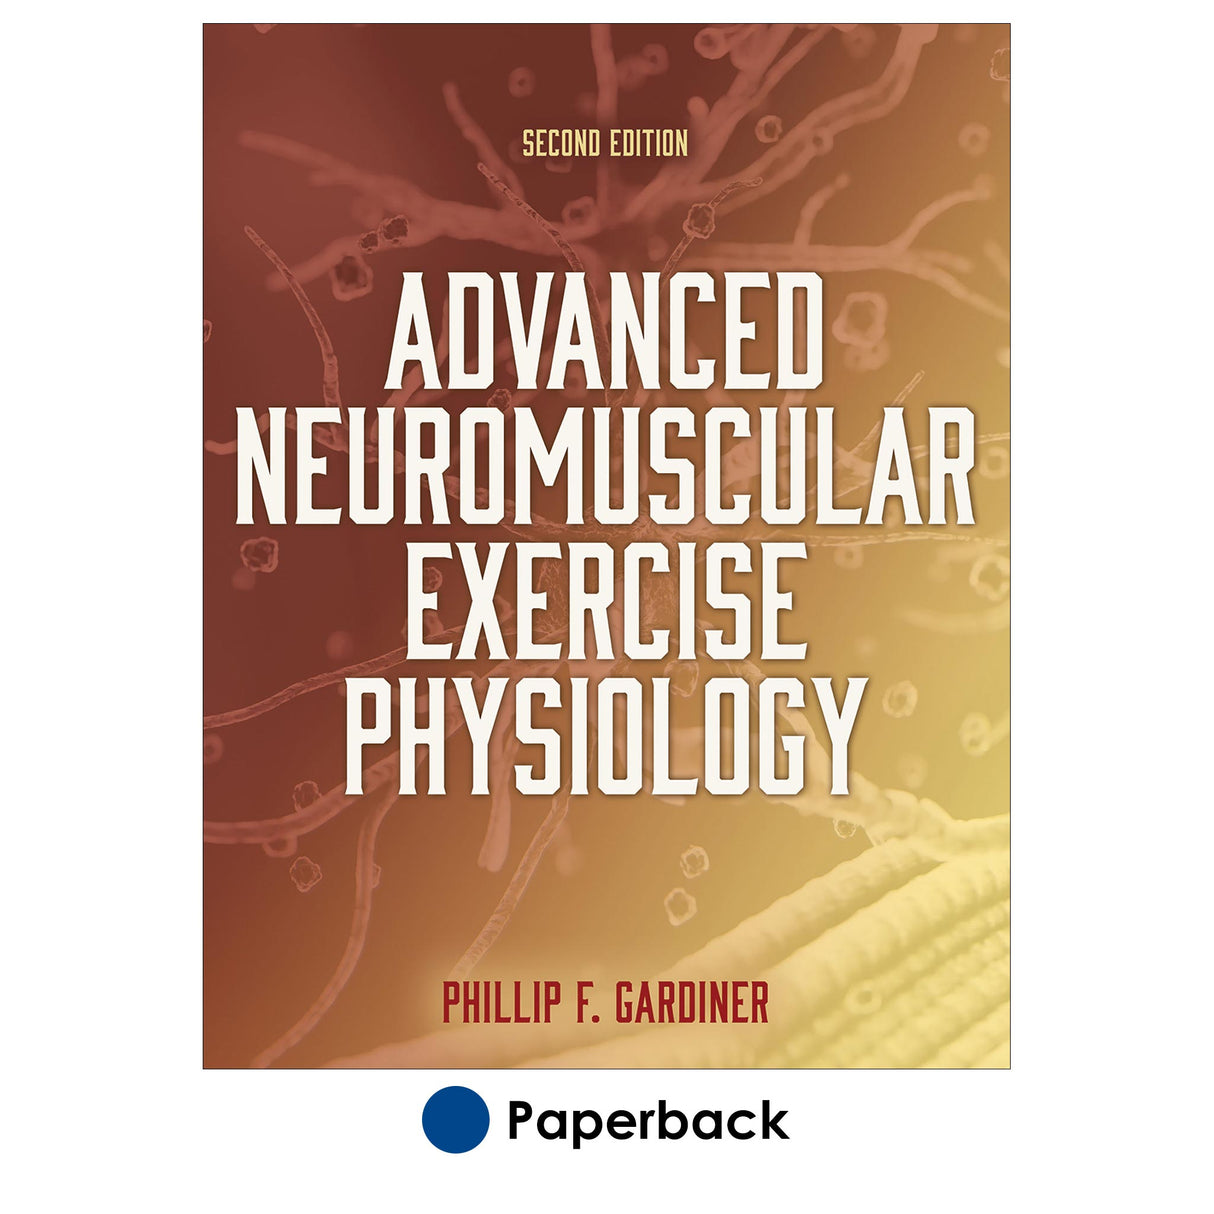 Advanced Neuromuscular Exercise Physiology-2nd Edition